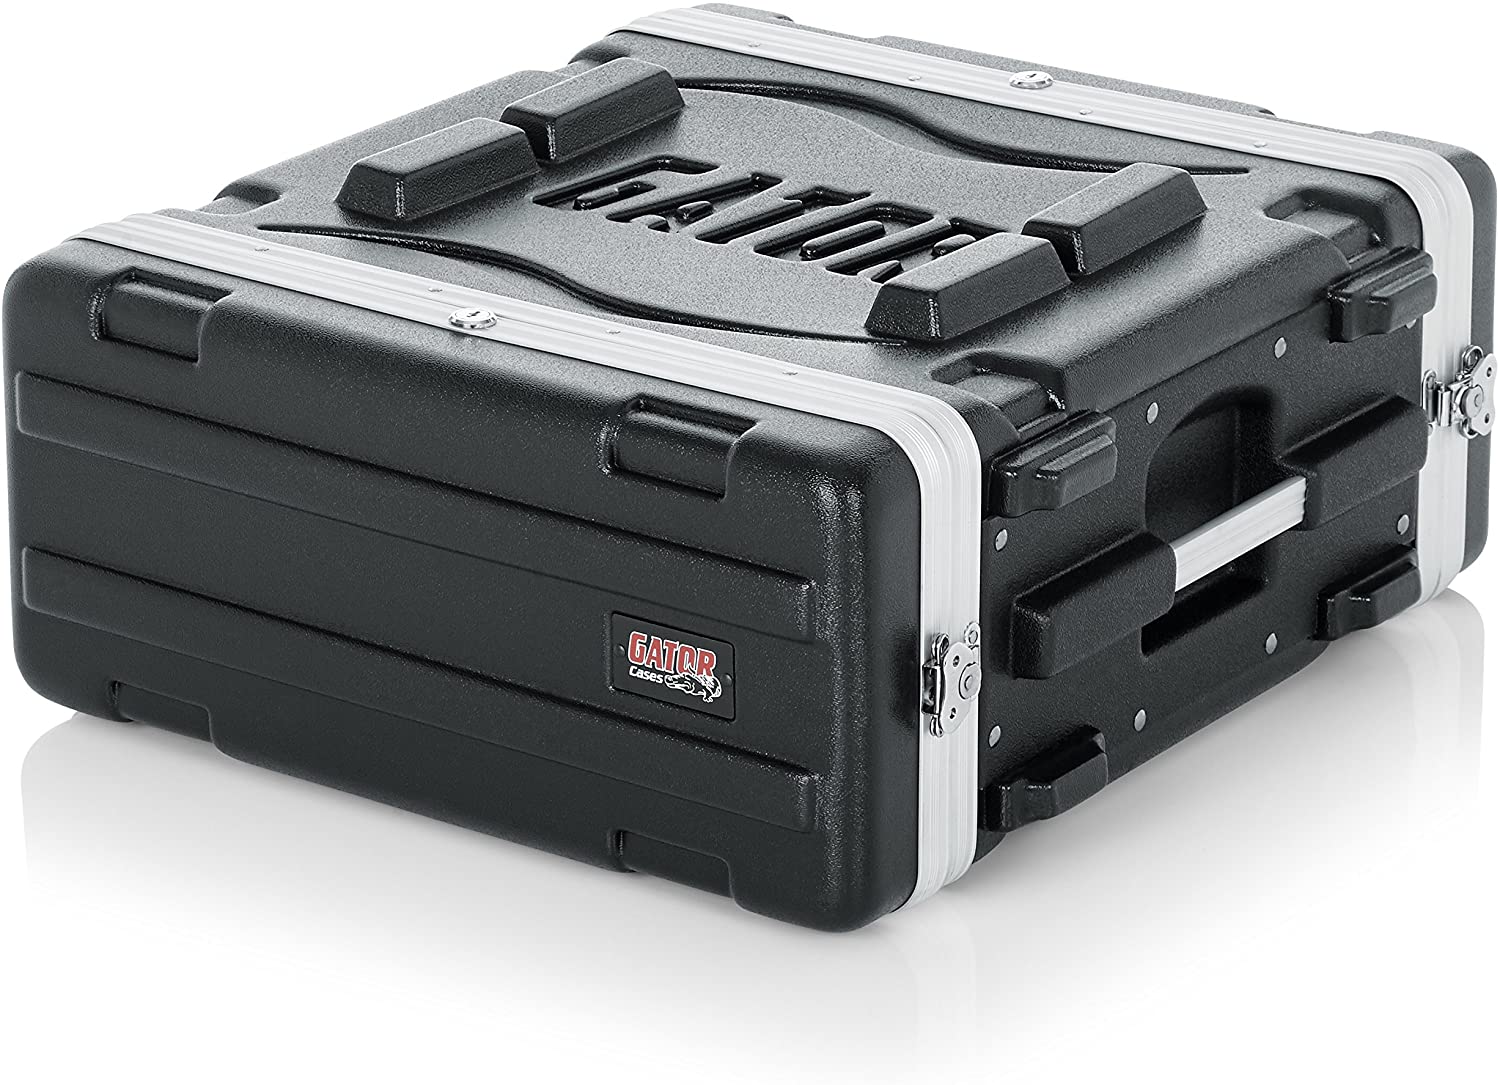 Gator Cases Lightweight Molded 4U Rack Case with Heavy Duty Latches - GR-4L - Pro-Distributing